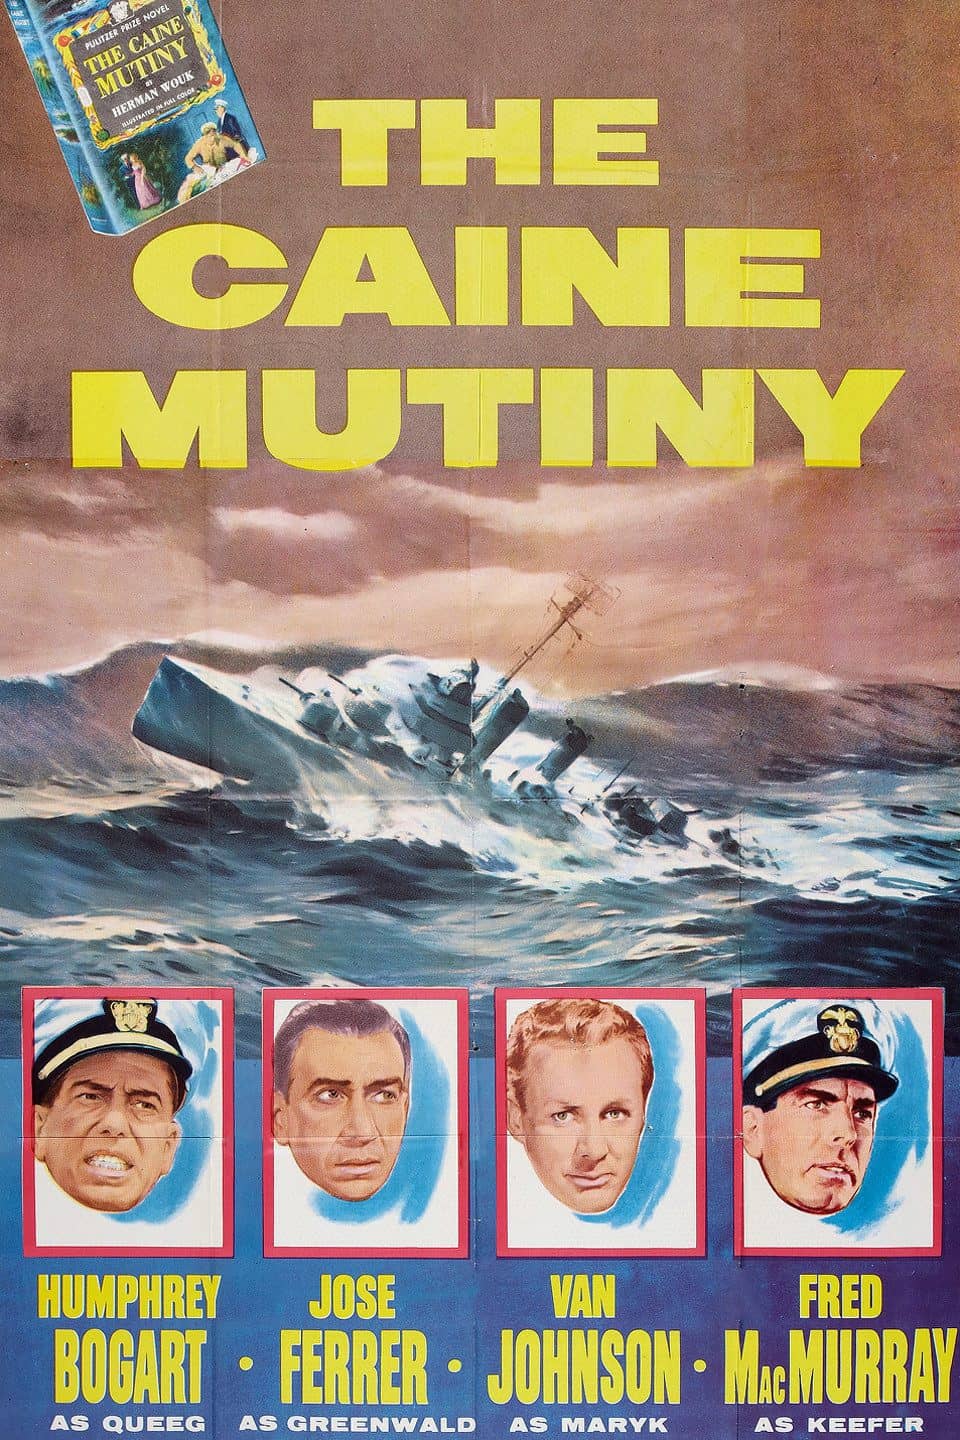 The Caine Mutiny Poster